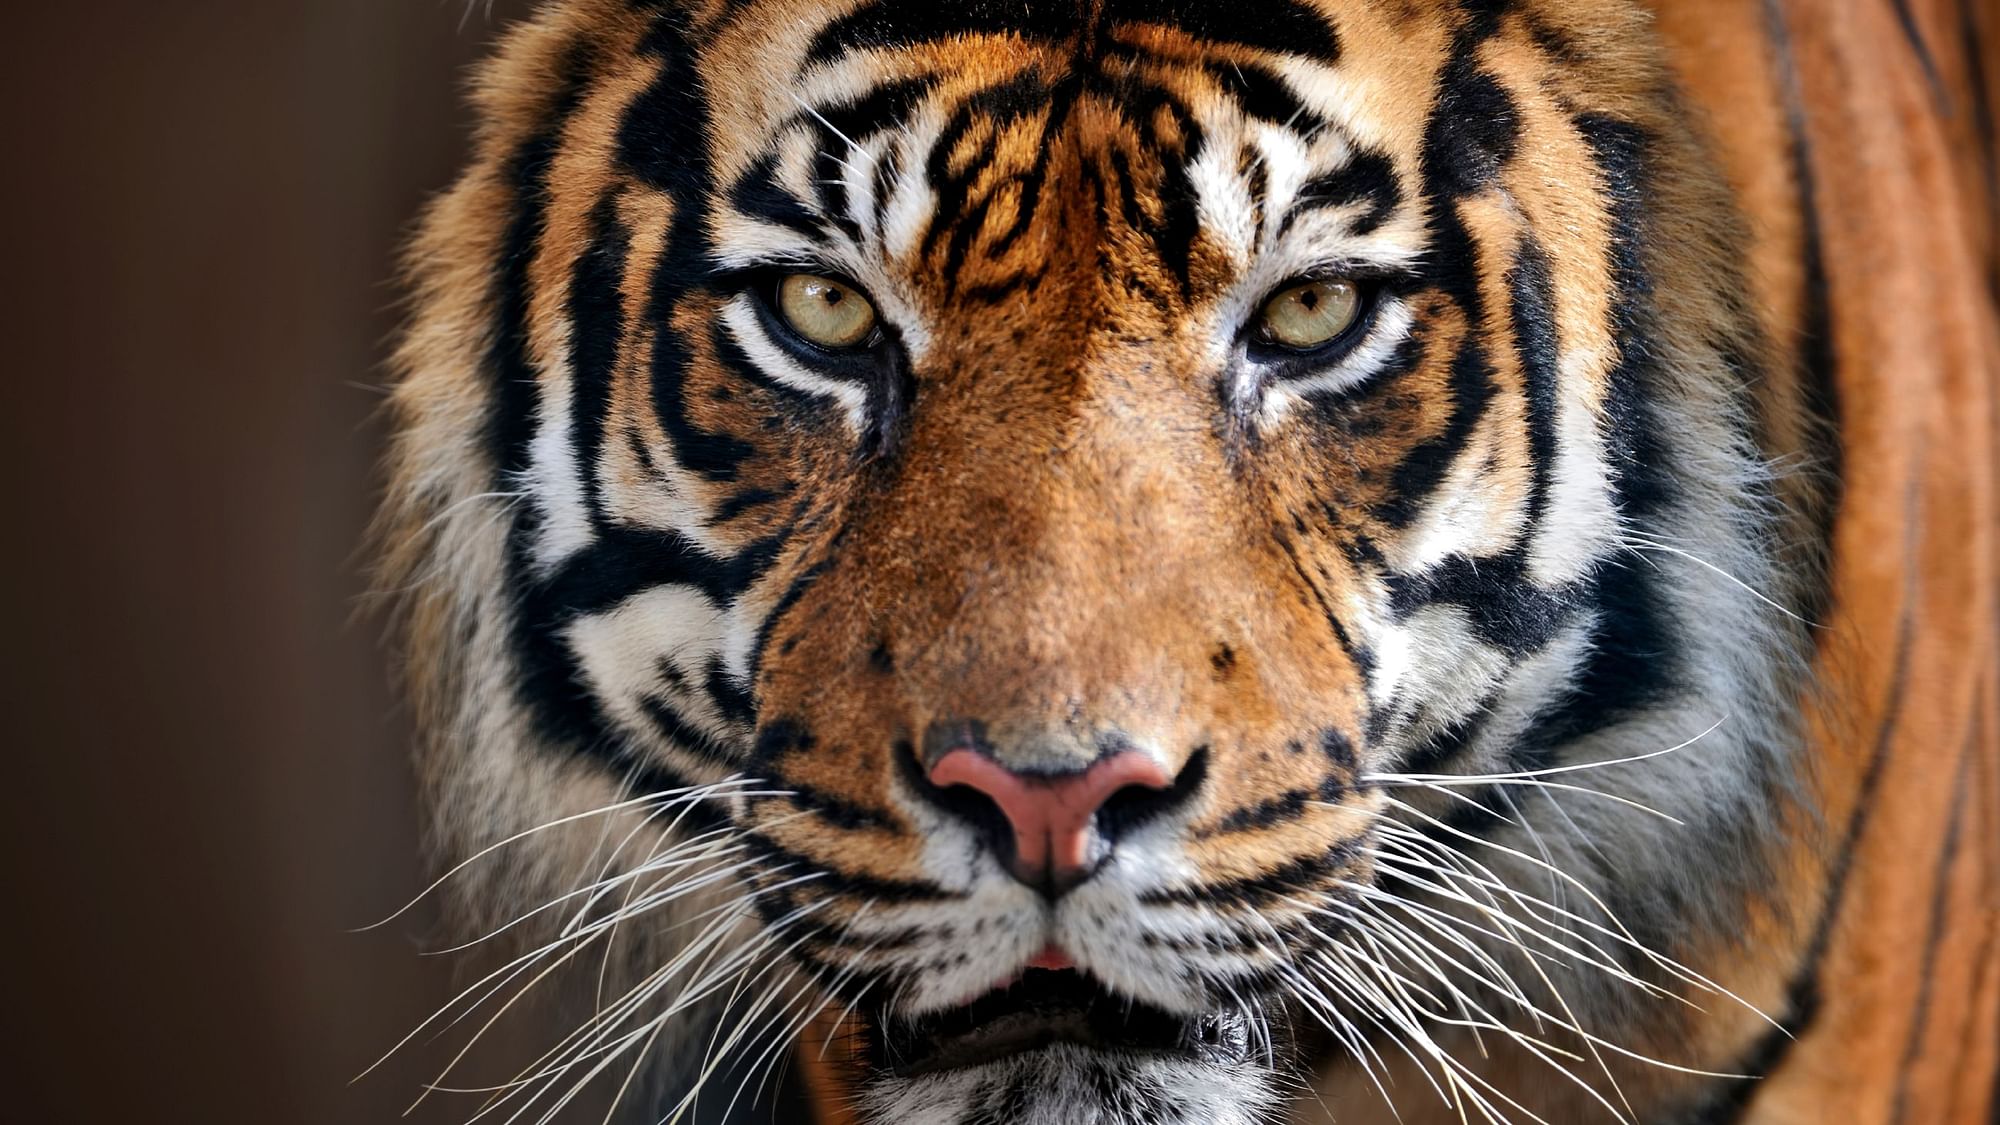 Earlier, the country’s tiger count was 2,226, Prakash Javadekar said during the Question Hour in the Upper House.